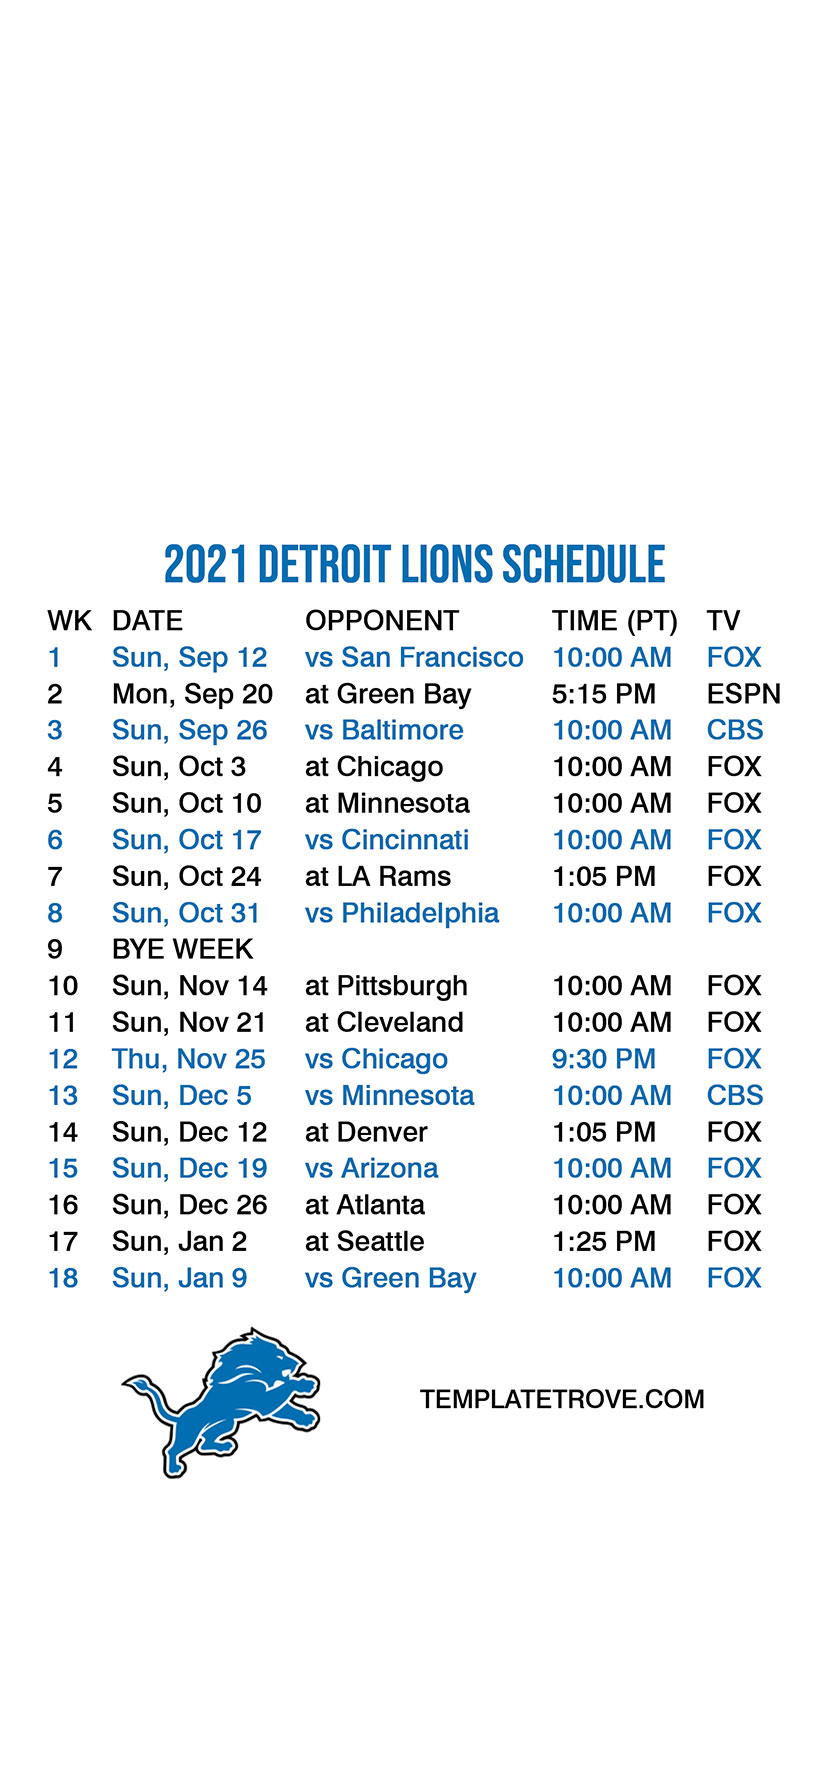 2021 2022 Detroit Lions Lock Screen Schedule For IPhone 6 